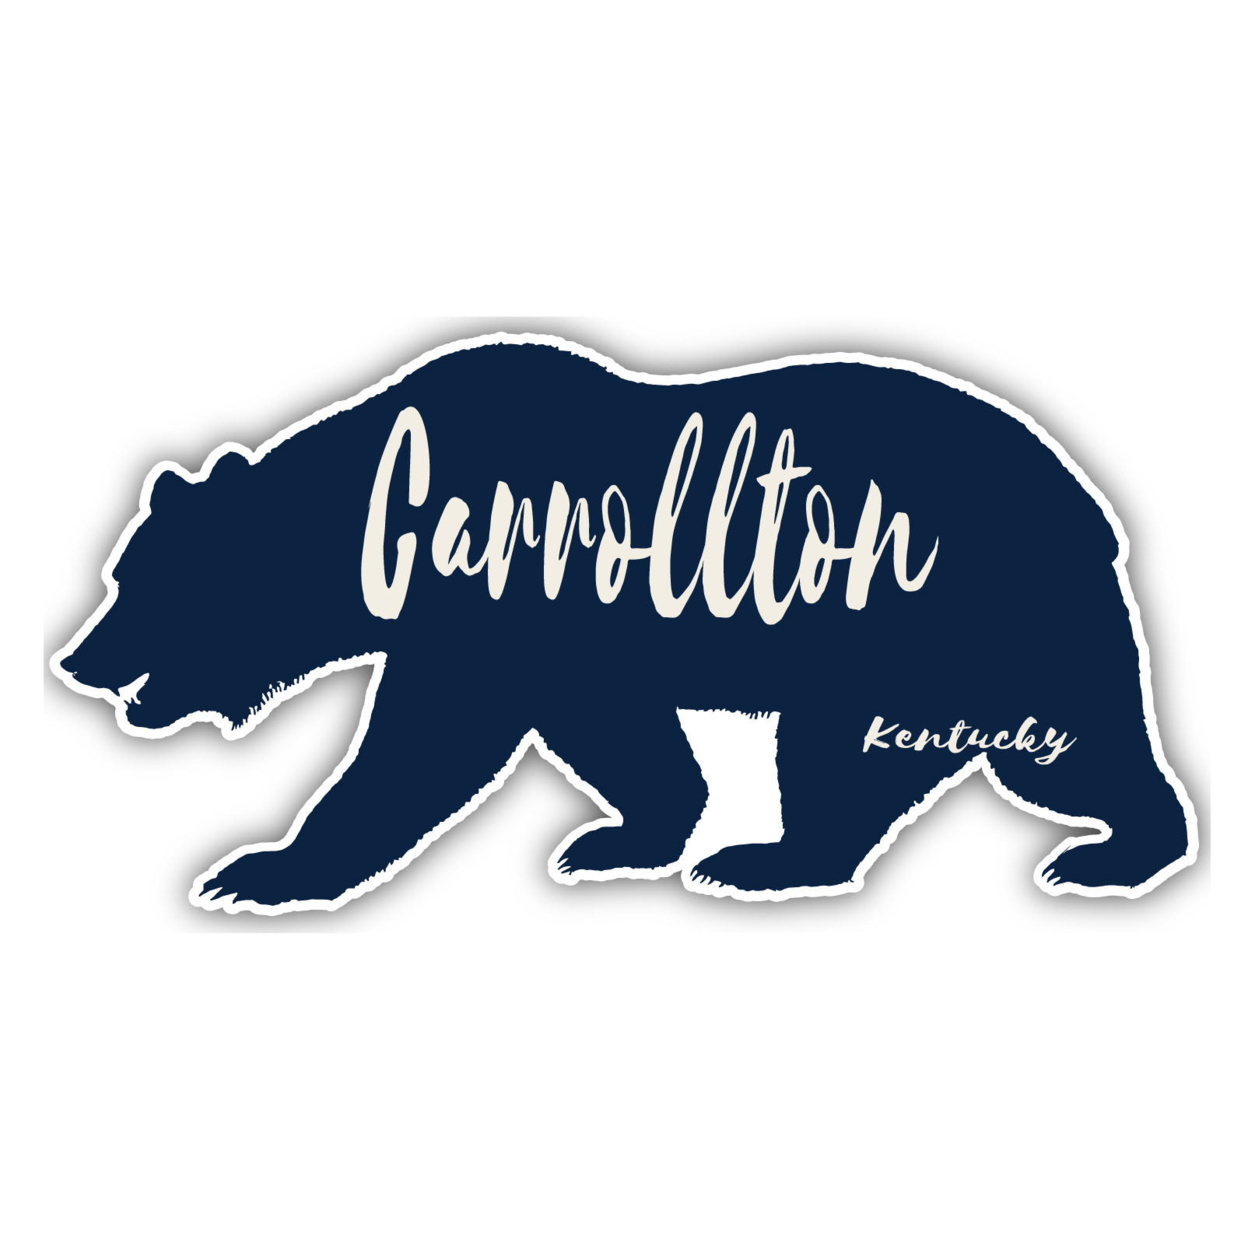 Carrollton Kentucky Souvenir Decorative Stickers (Choose Theme And Size) - 4-Pack, 2-Inch, Great Outdoors